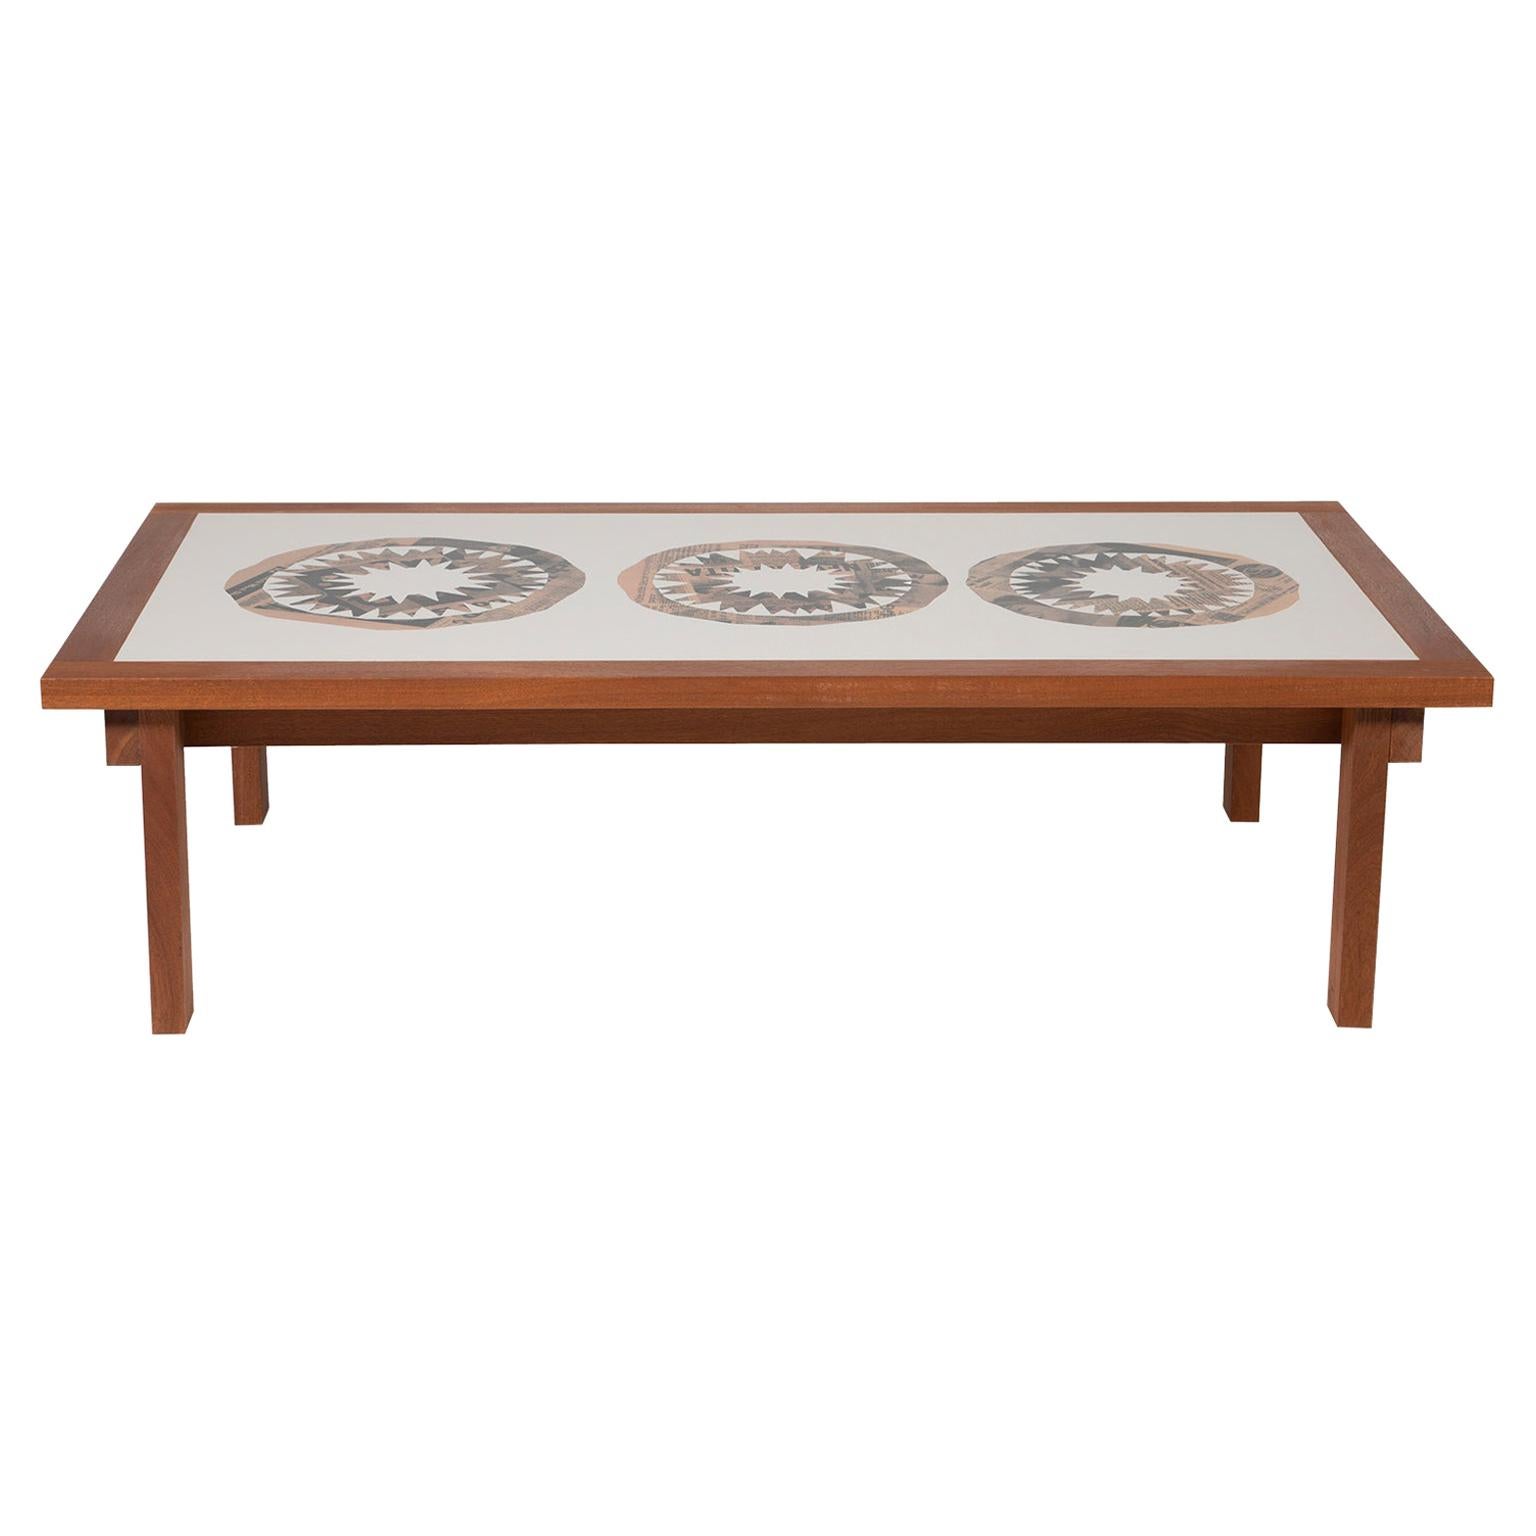 Triple Star Table by DANAD Design 'Peter Blake', Contemporary For Sale